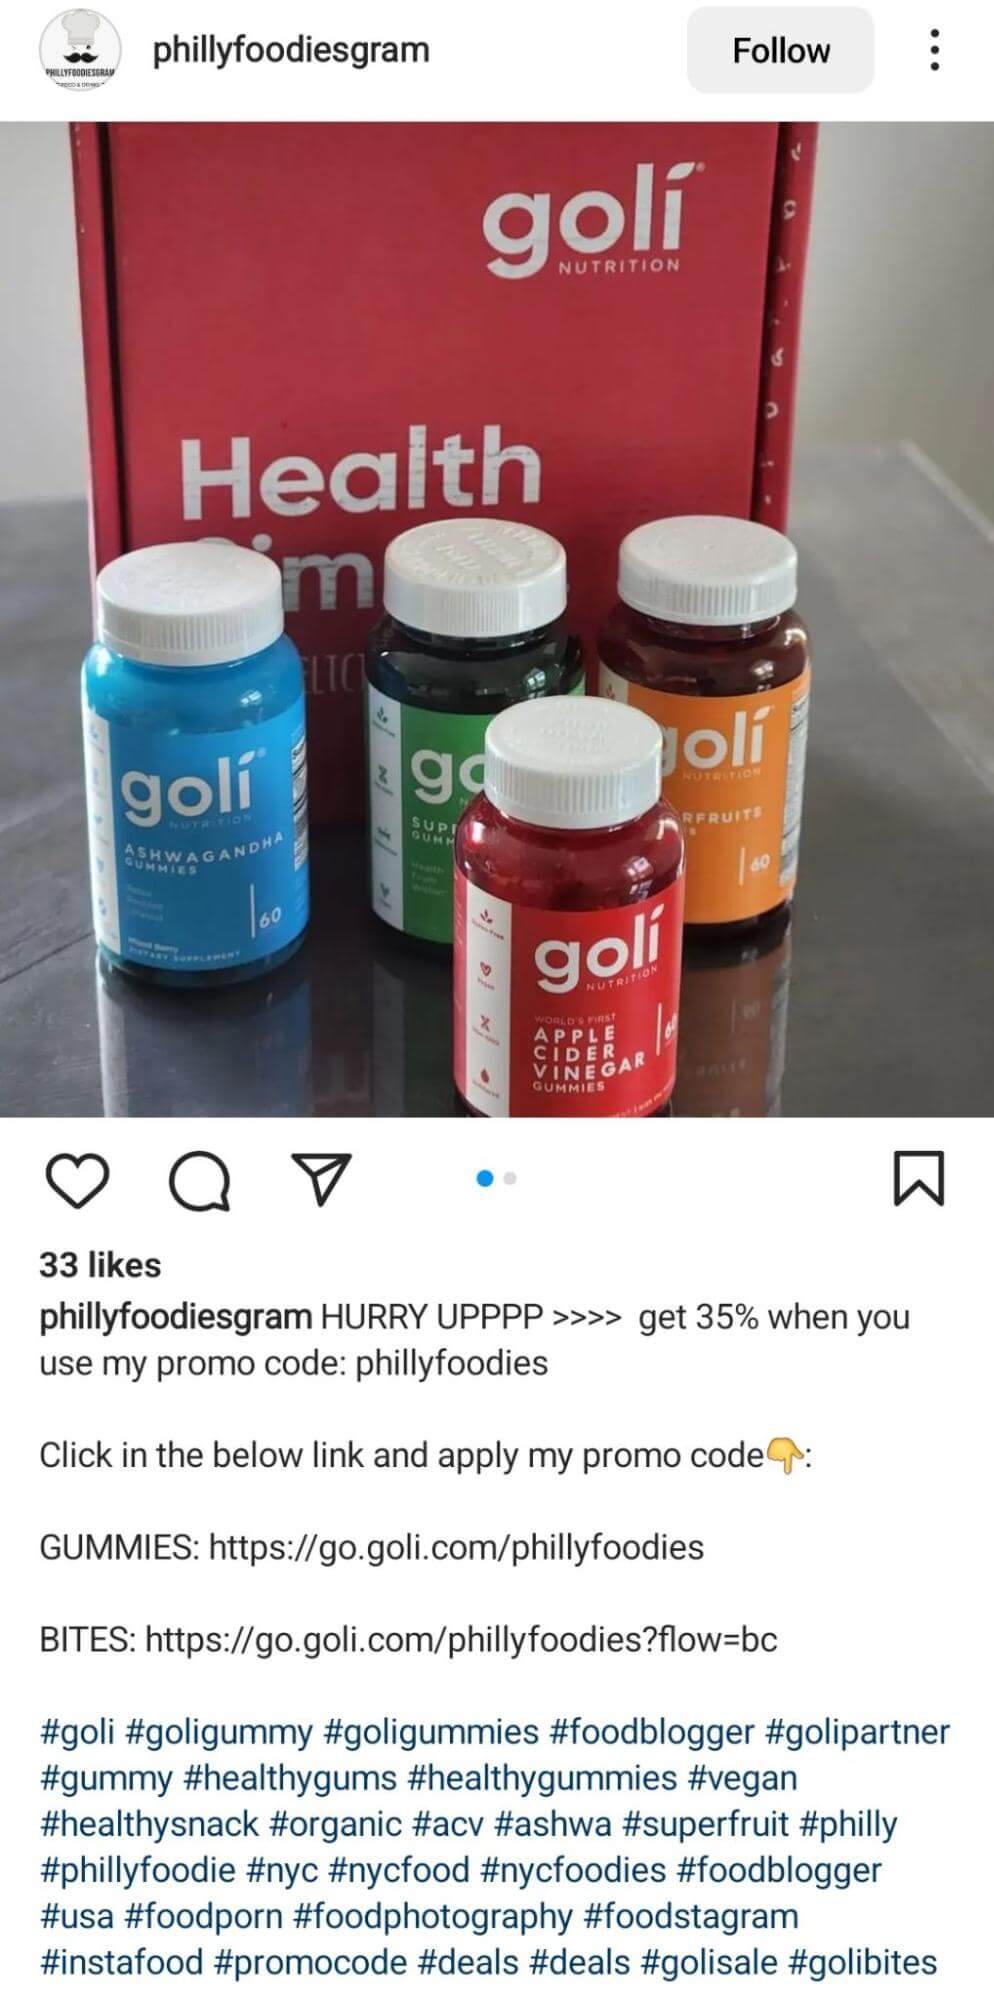 how-to-partner-with-influencers-to-reach-new-audiences-on-instagram-caption-mentions-influencers-promo-code-instructions-to-redeem-for-discount-phillyfoodiesgram-golinutrition-example-12